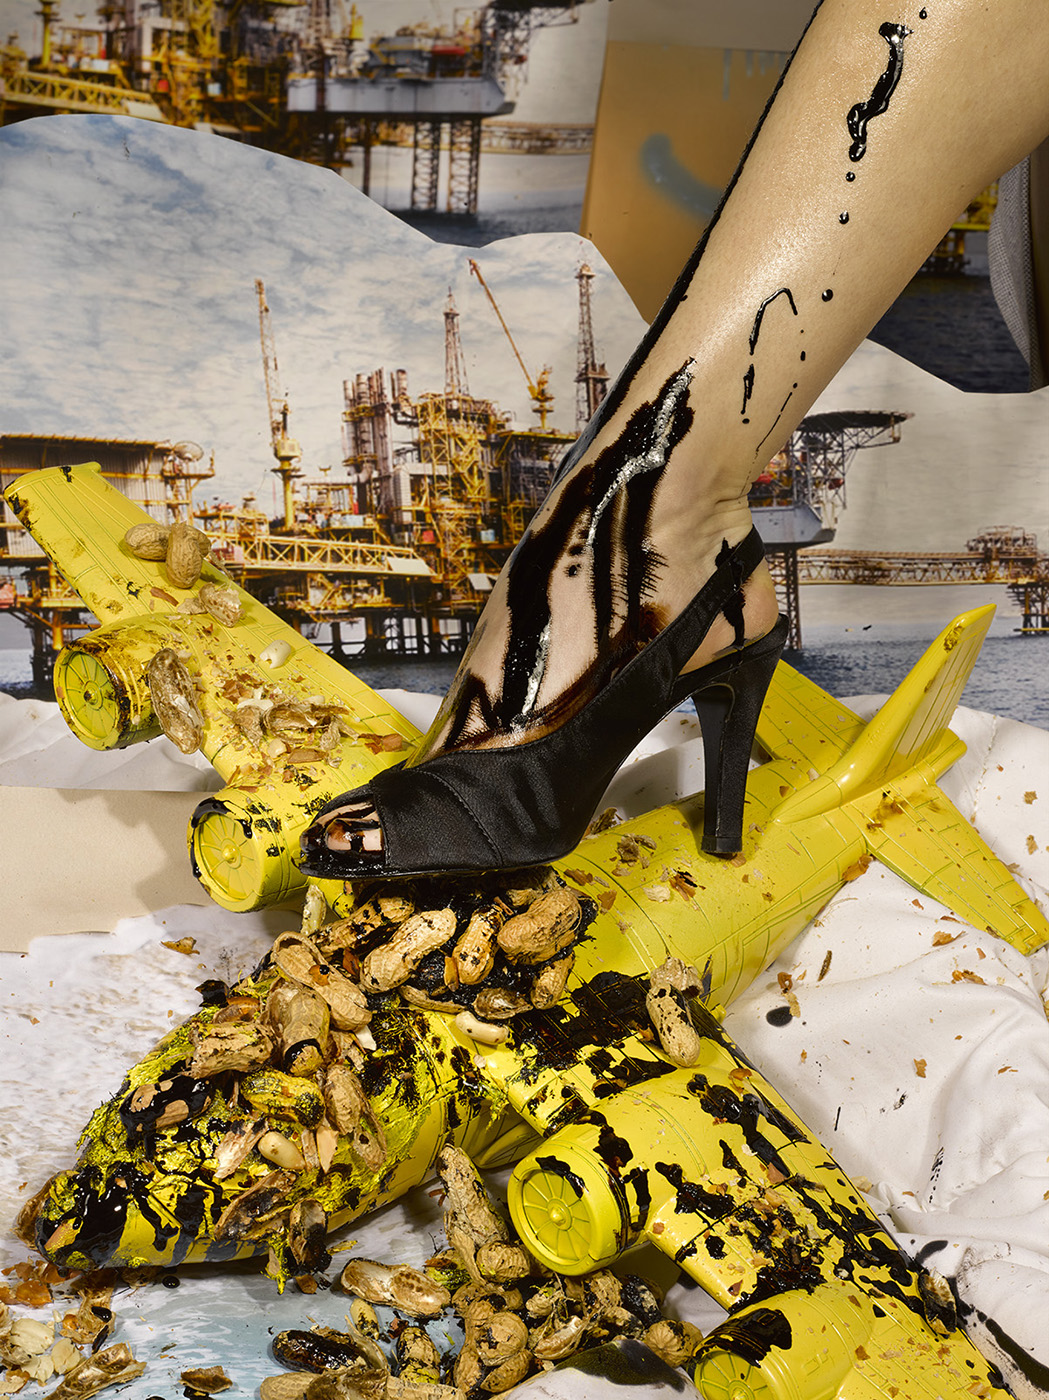 Closeup of a black stiletto stepping on a yellow model plane covered in oil and peanut shells, with an oil rig collage in the background.